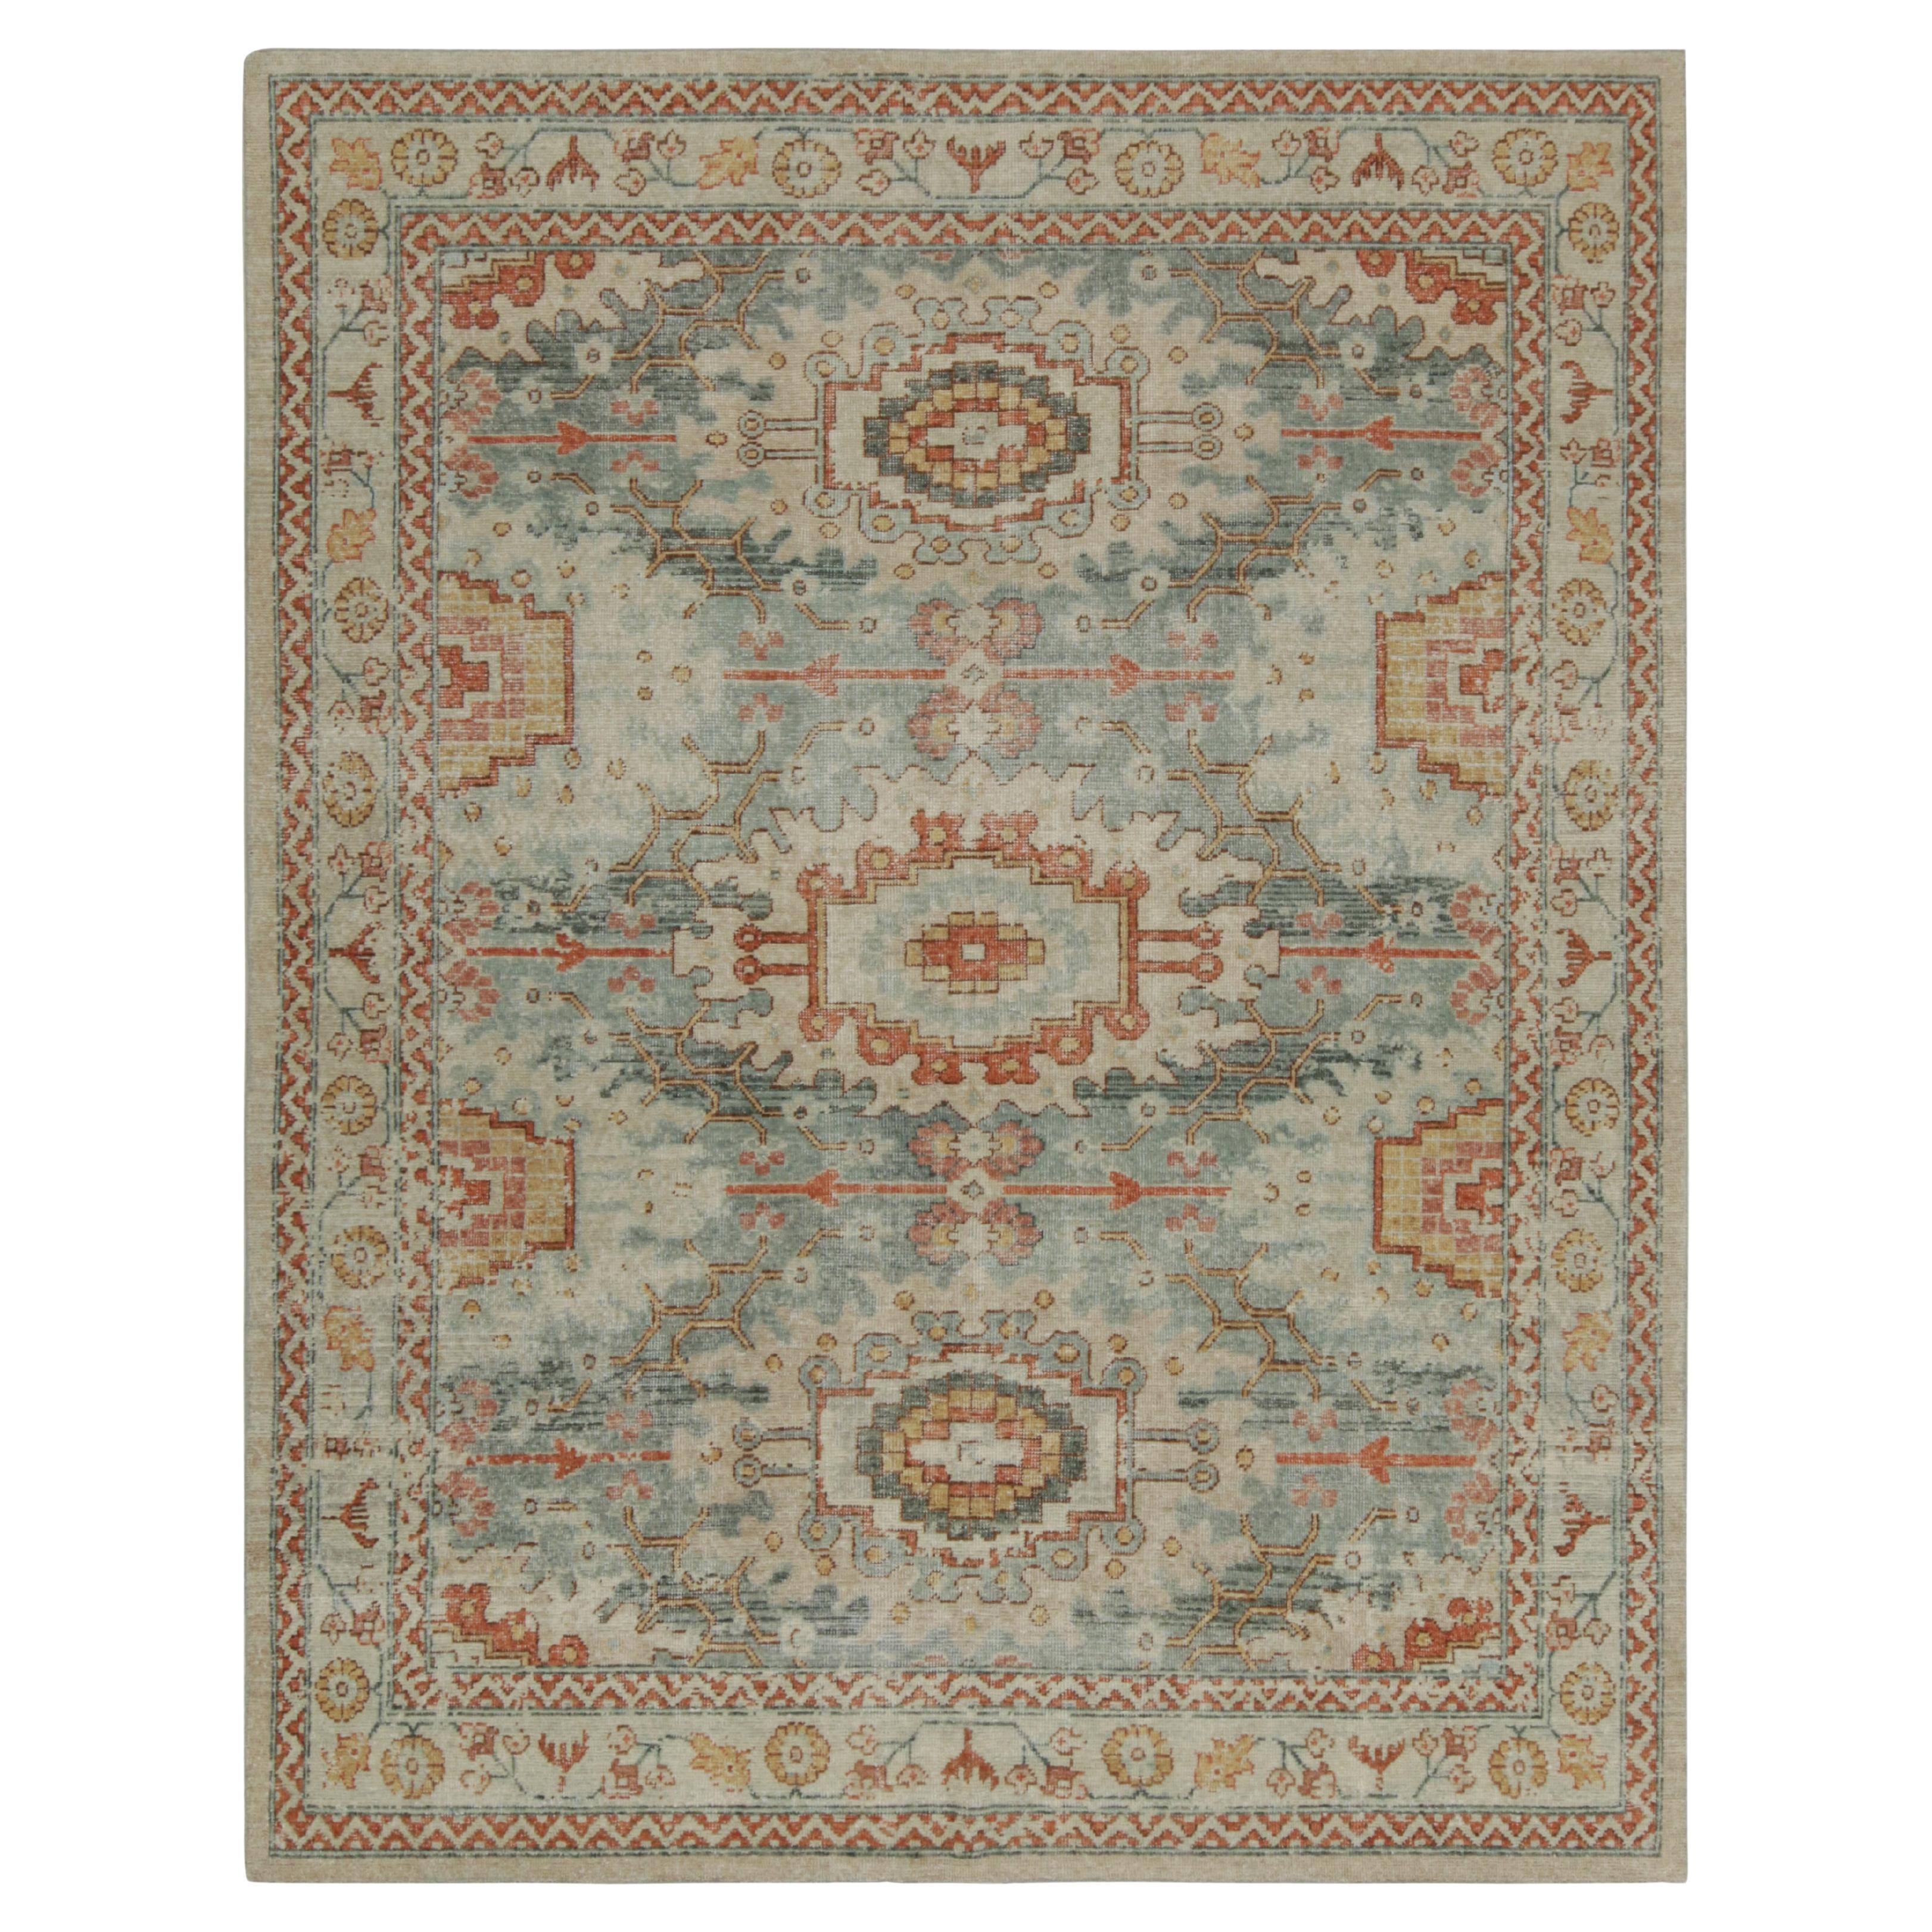 Rug & Kilim’s Distressed Tribal Style Rug in Blue with Rustic Floral Patterns